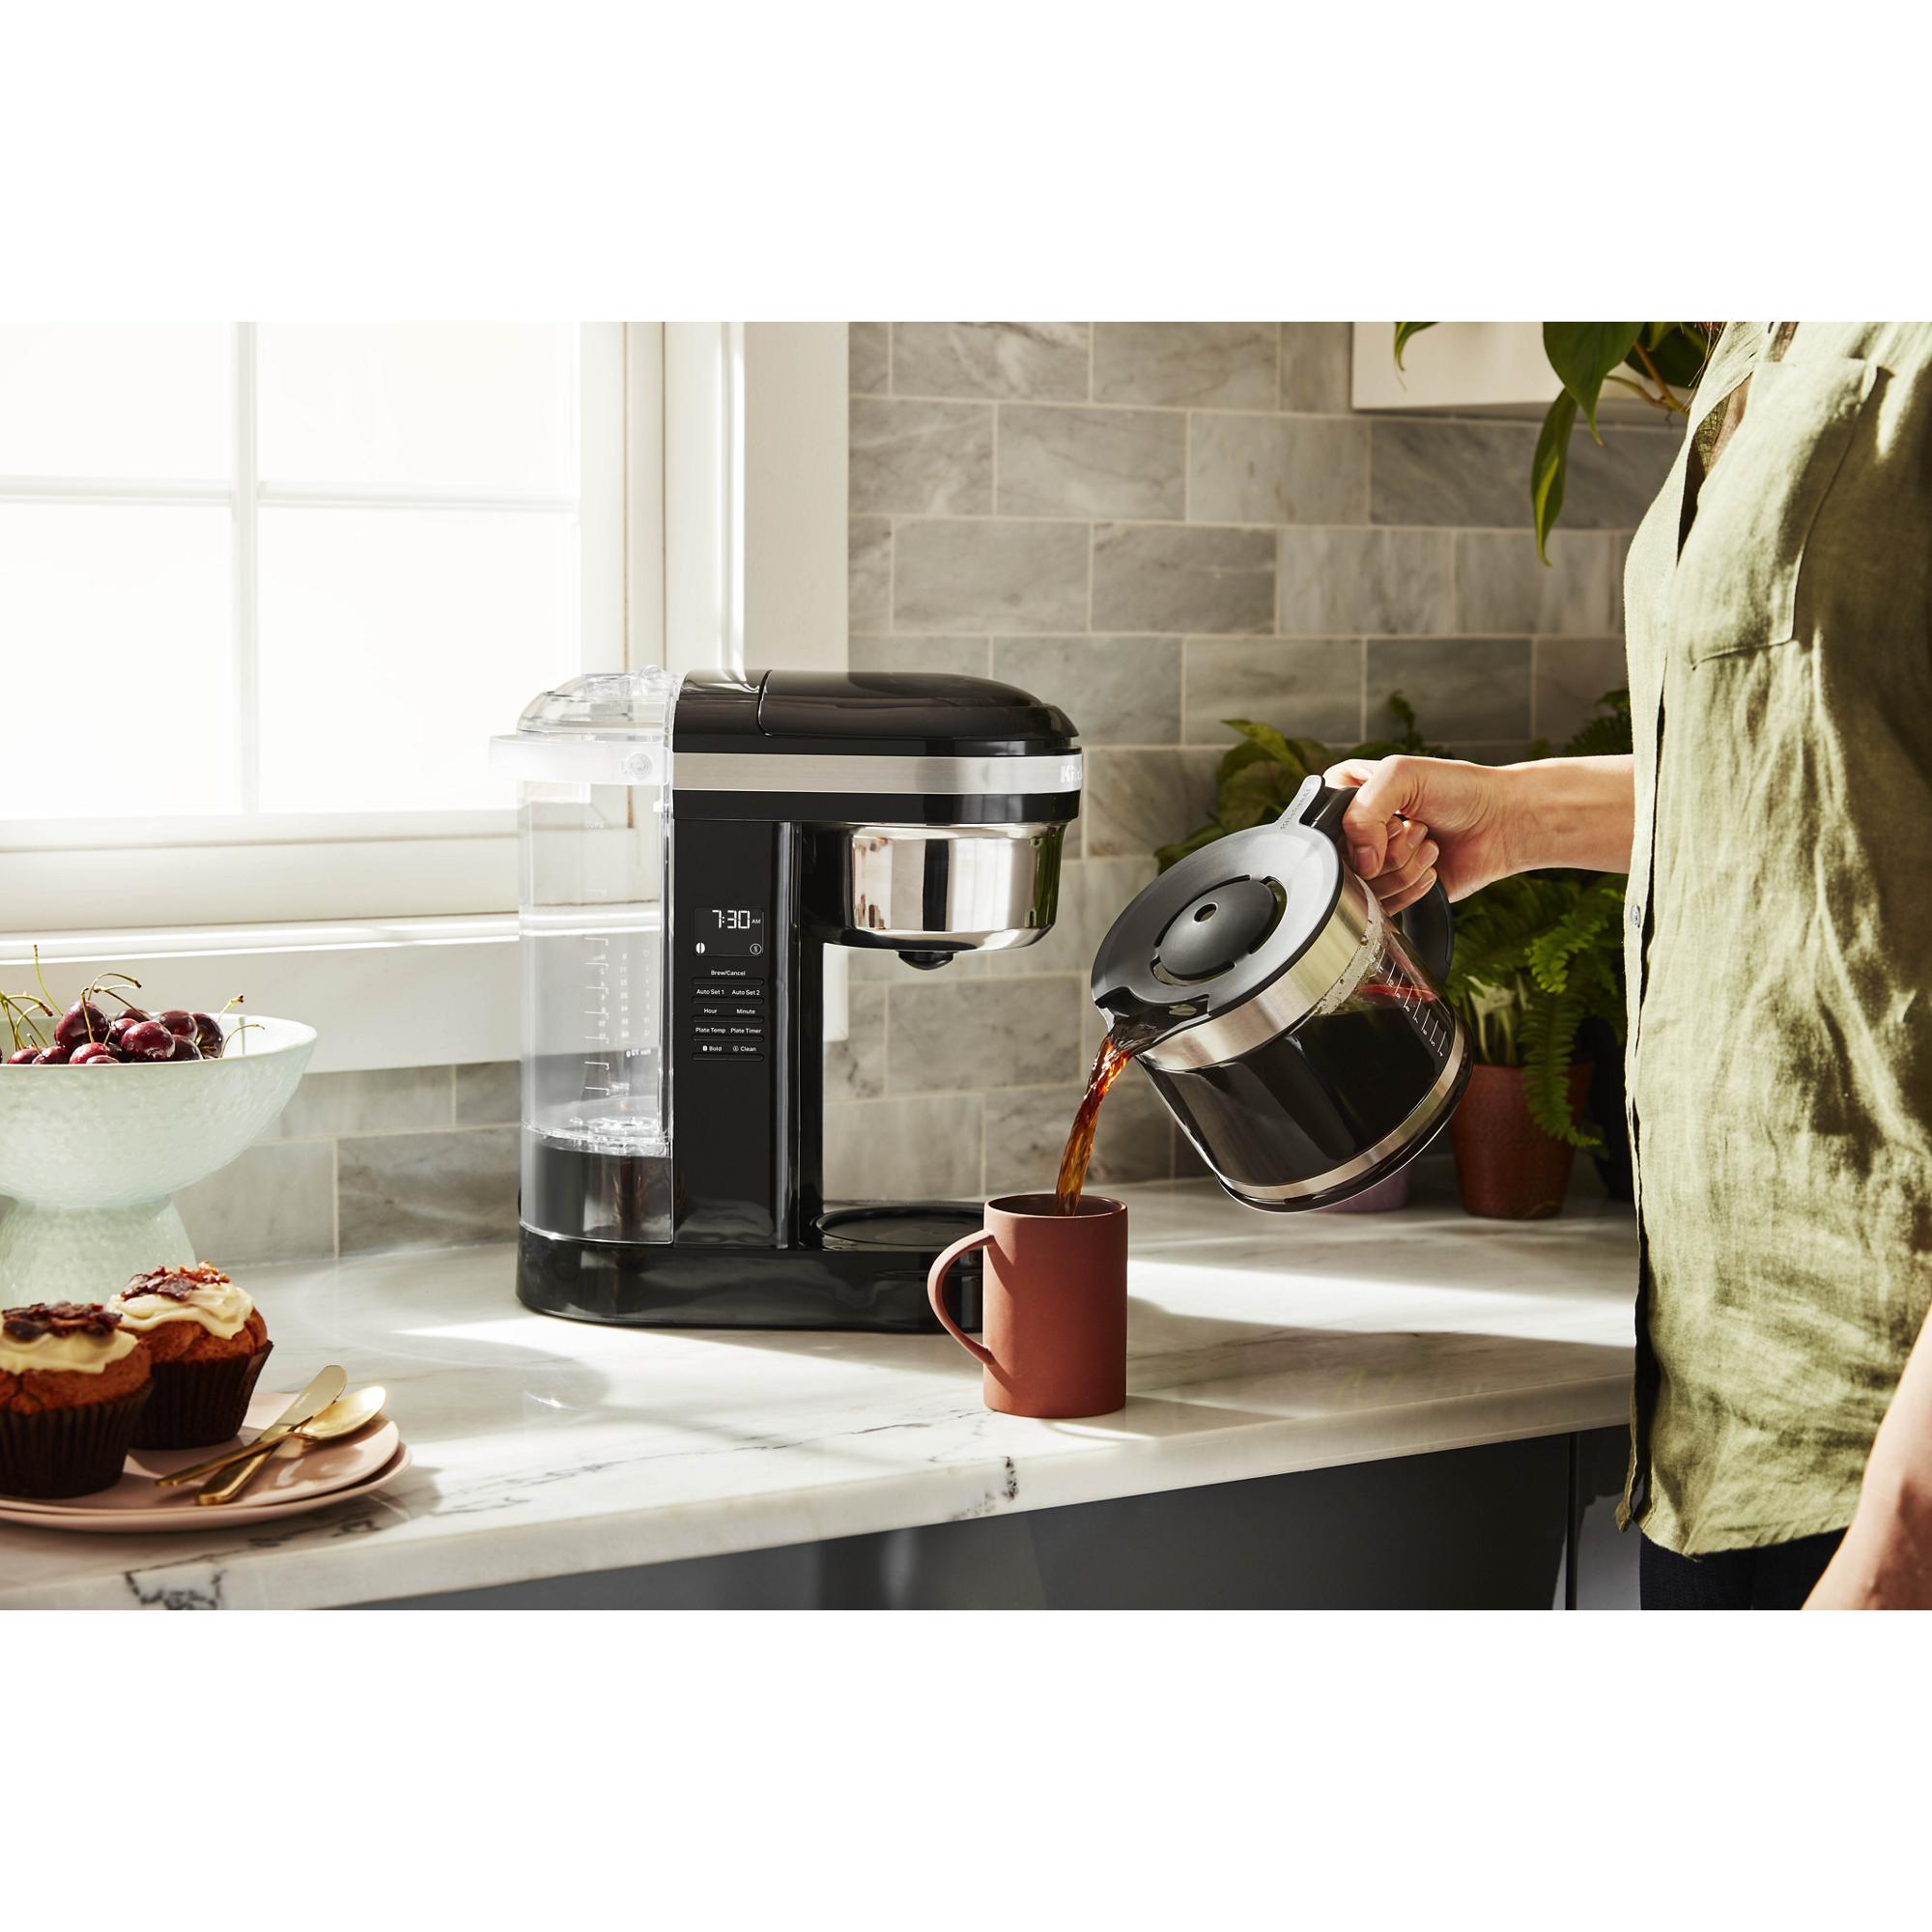 Krups Simply Brew Stainless Steel Drip Coffee Maker 10 Cup 900 Watts  Digital Control, Coffee Filter, Drip Free, Dishwasher Safe Pot Silver and  Black